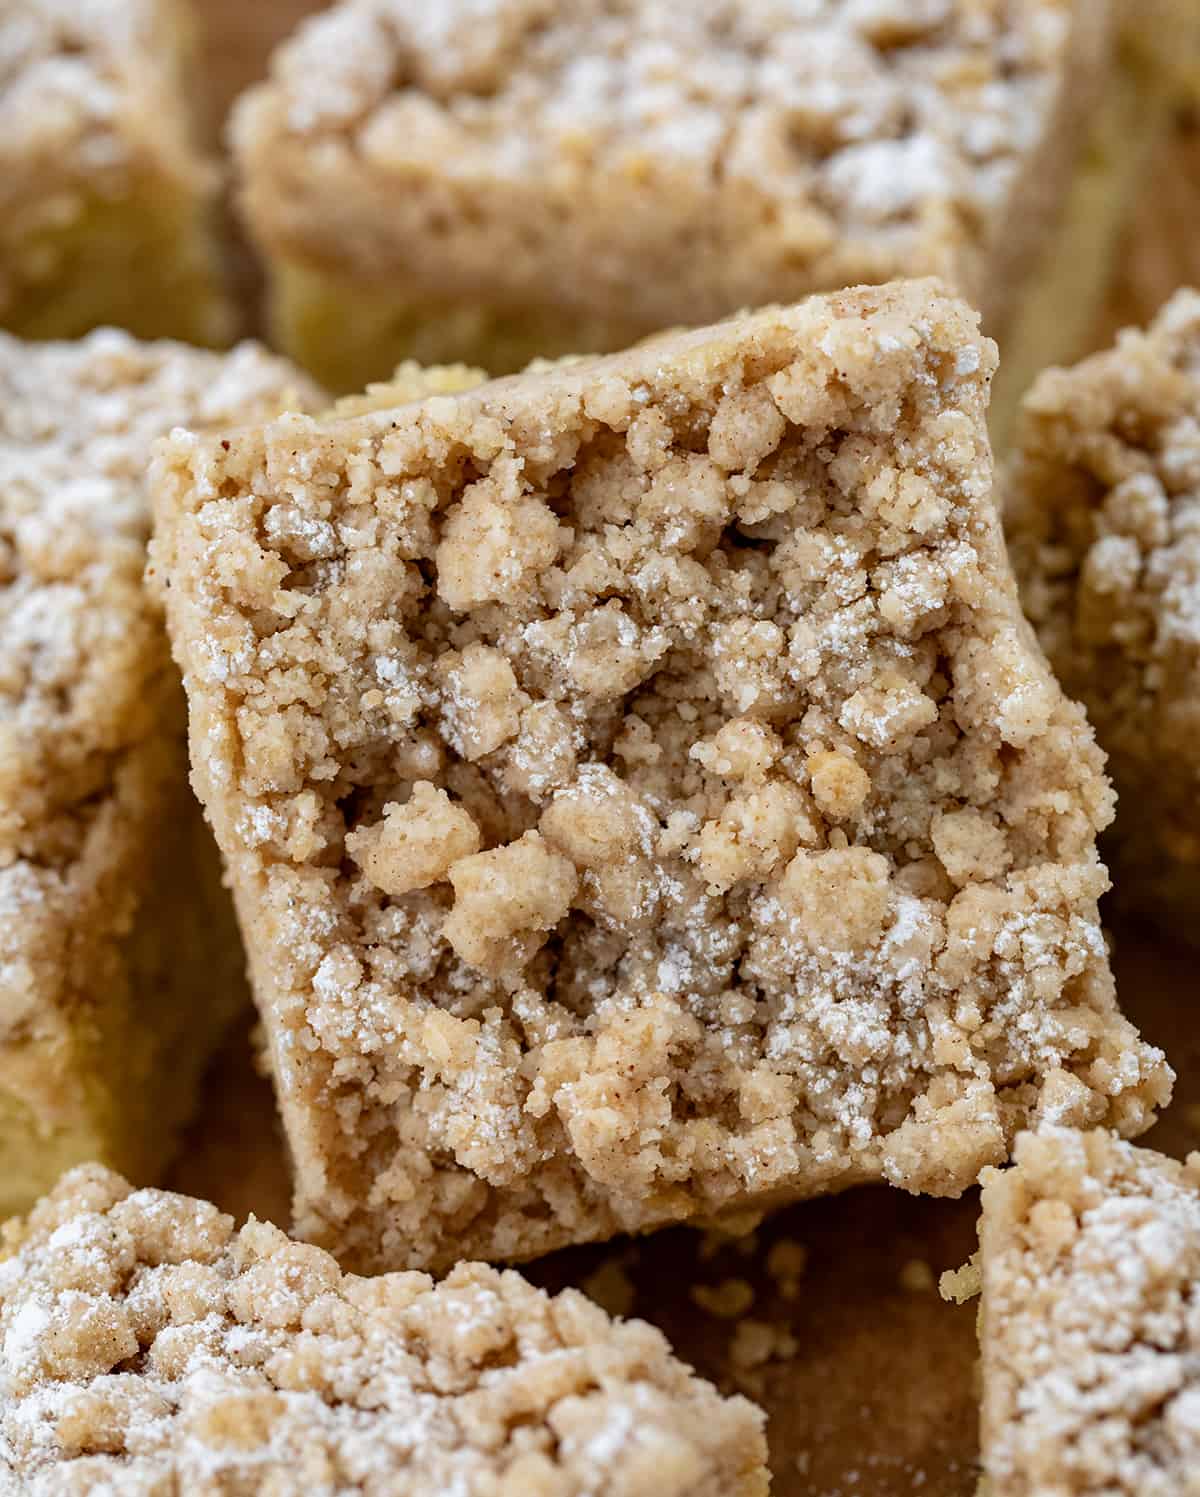 CLose up of a piece of Banana Crumb Cake surrounded by more.